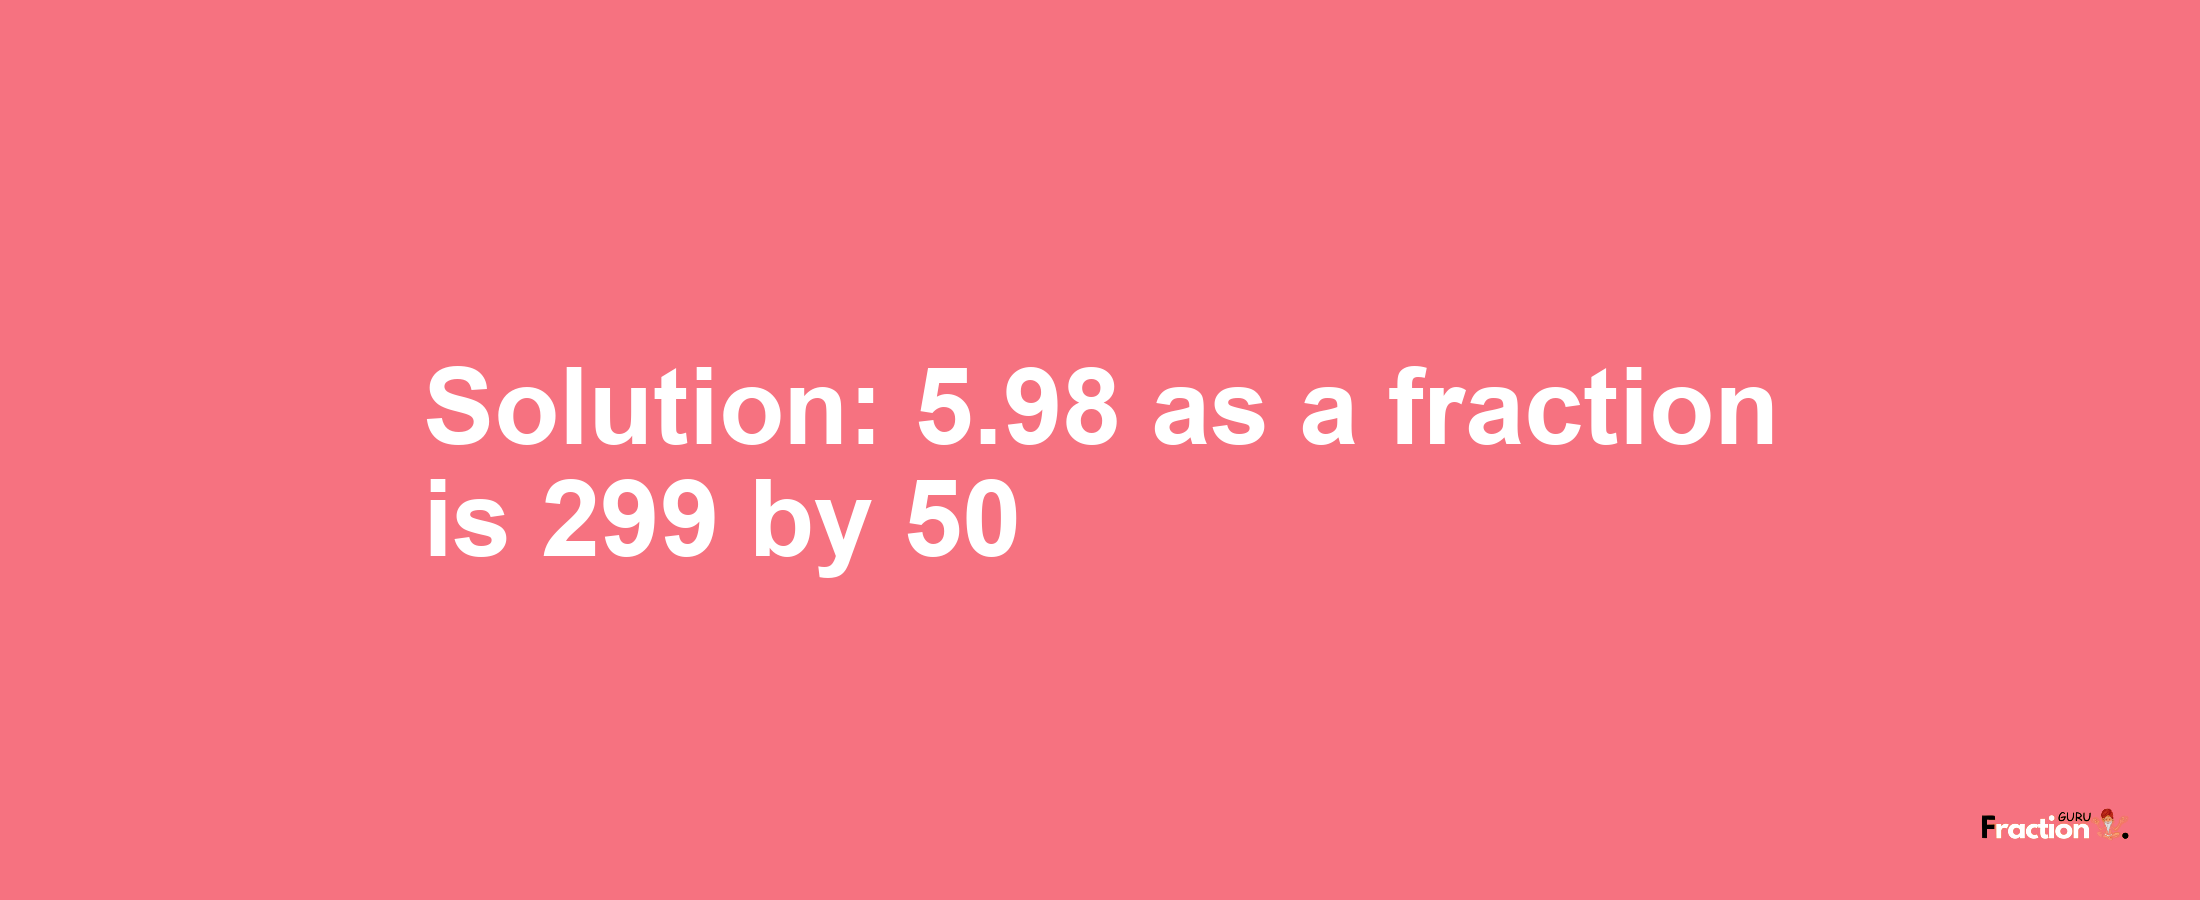 Solution:5.98 as a fraction is 299/50